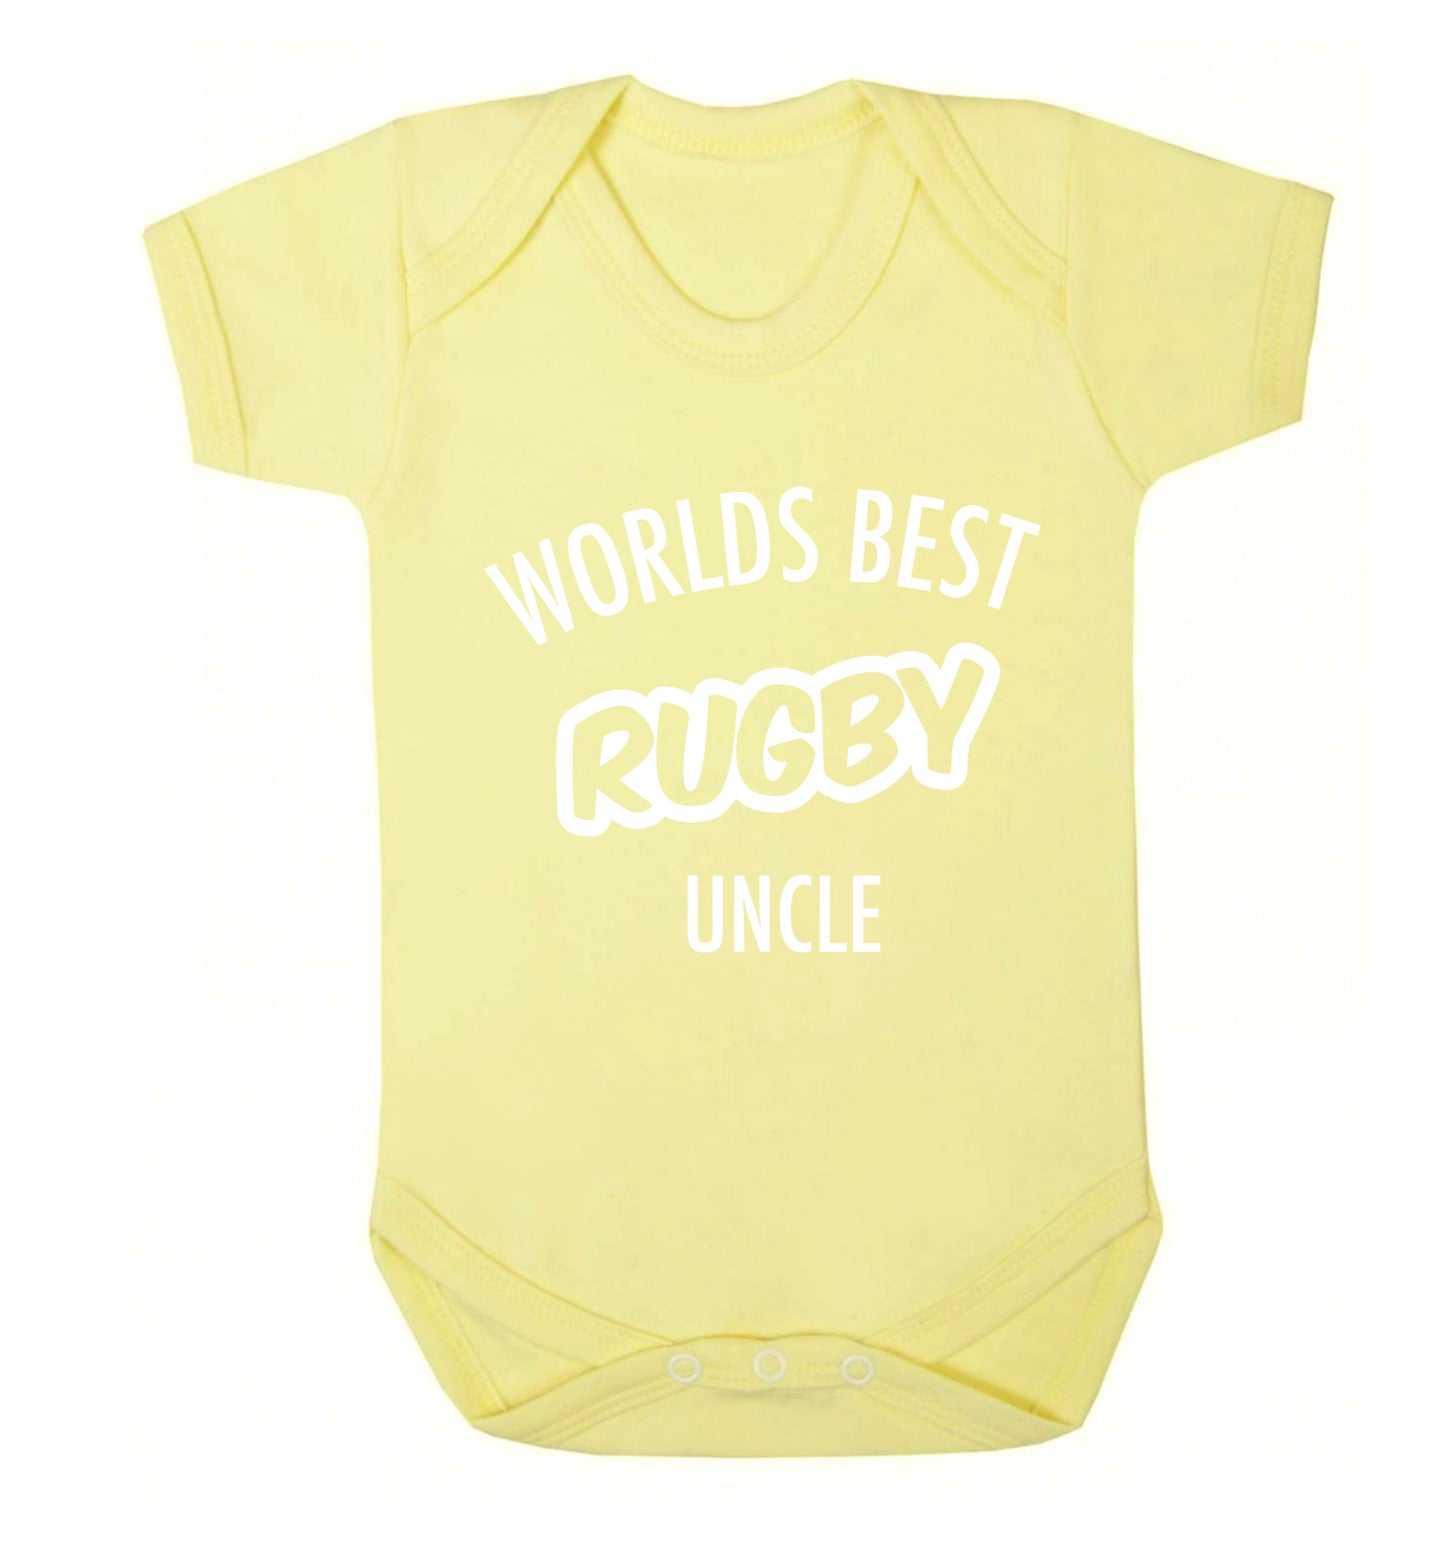 Worlds best rugby uncle Baby Vest pale yellow 18-24 months